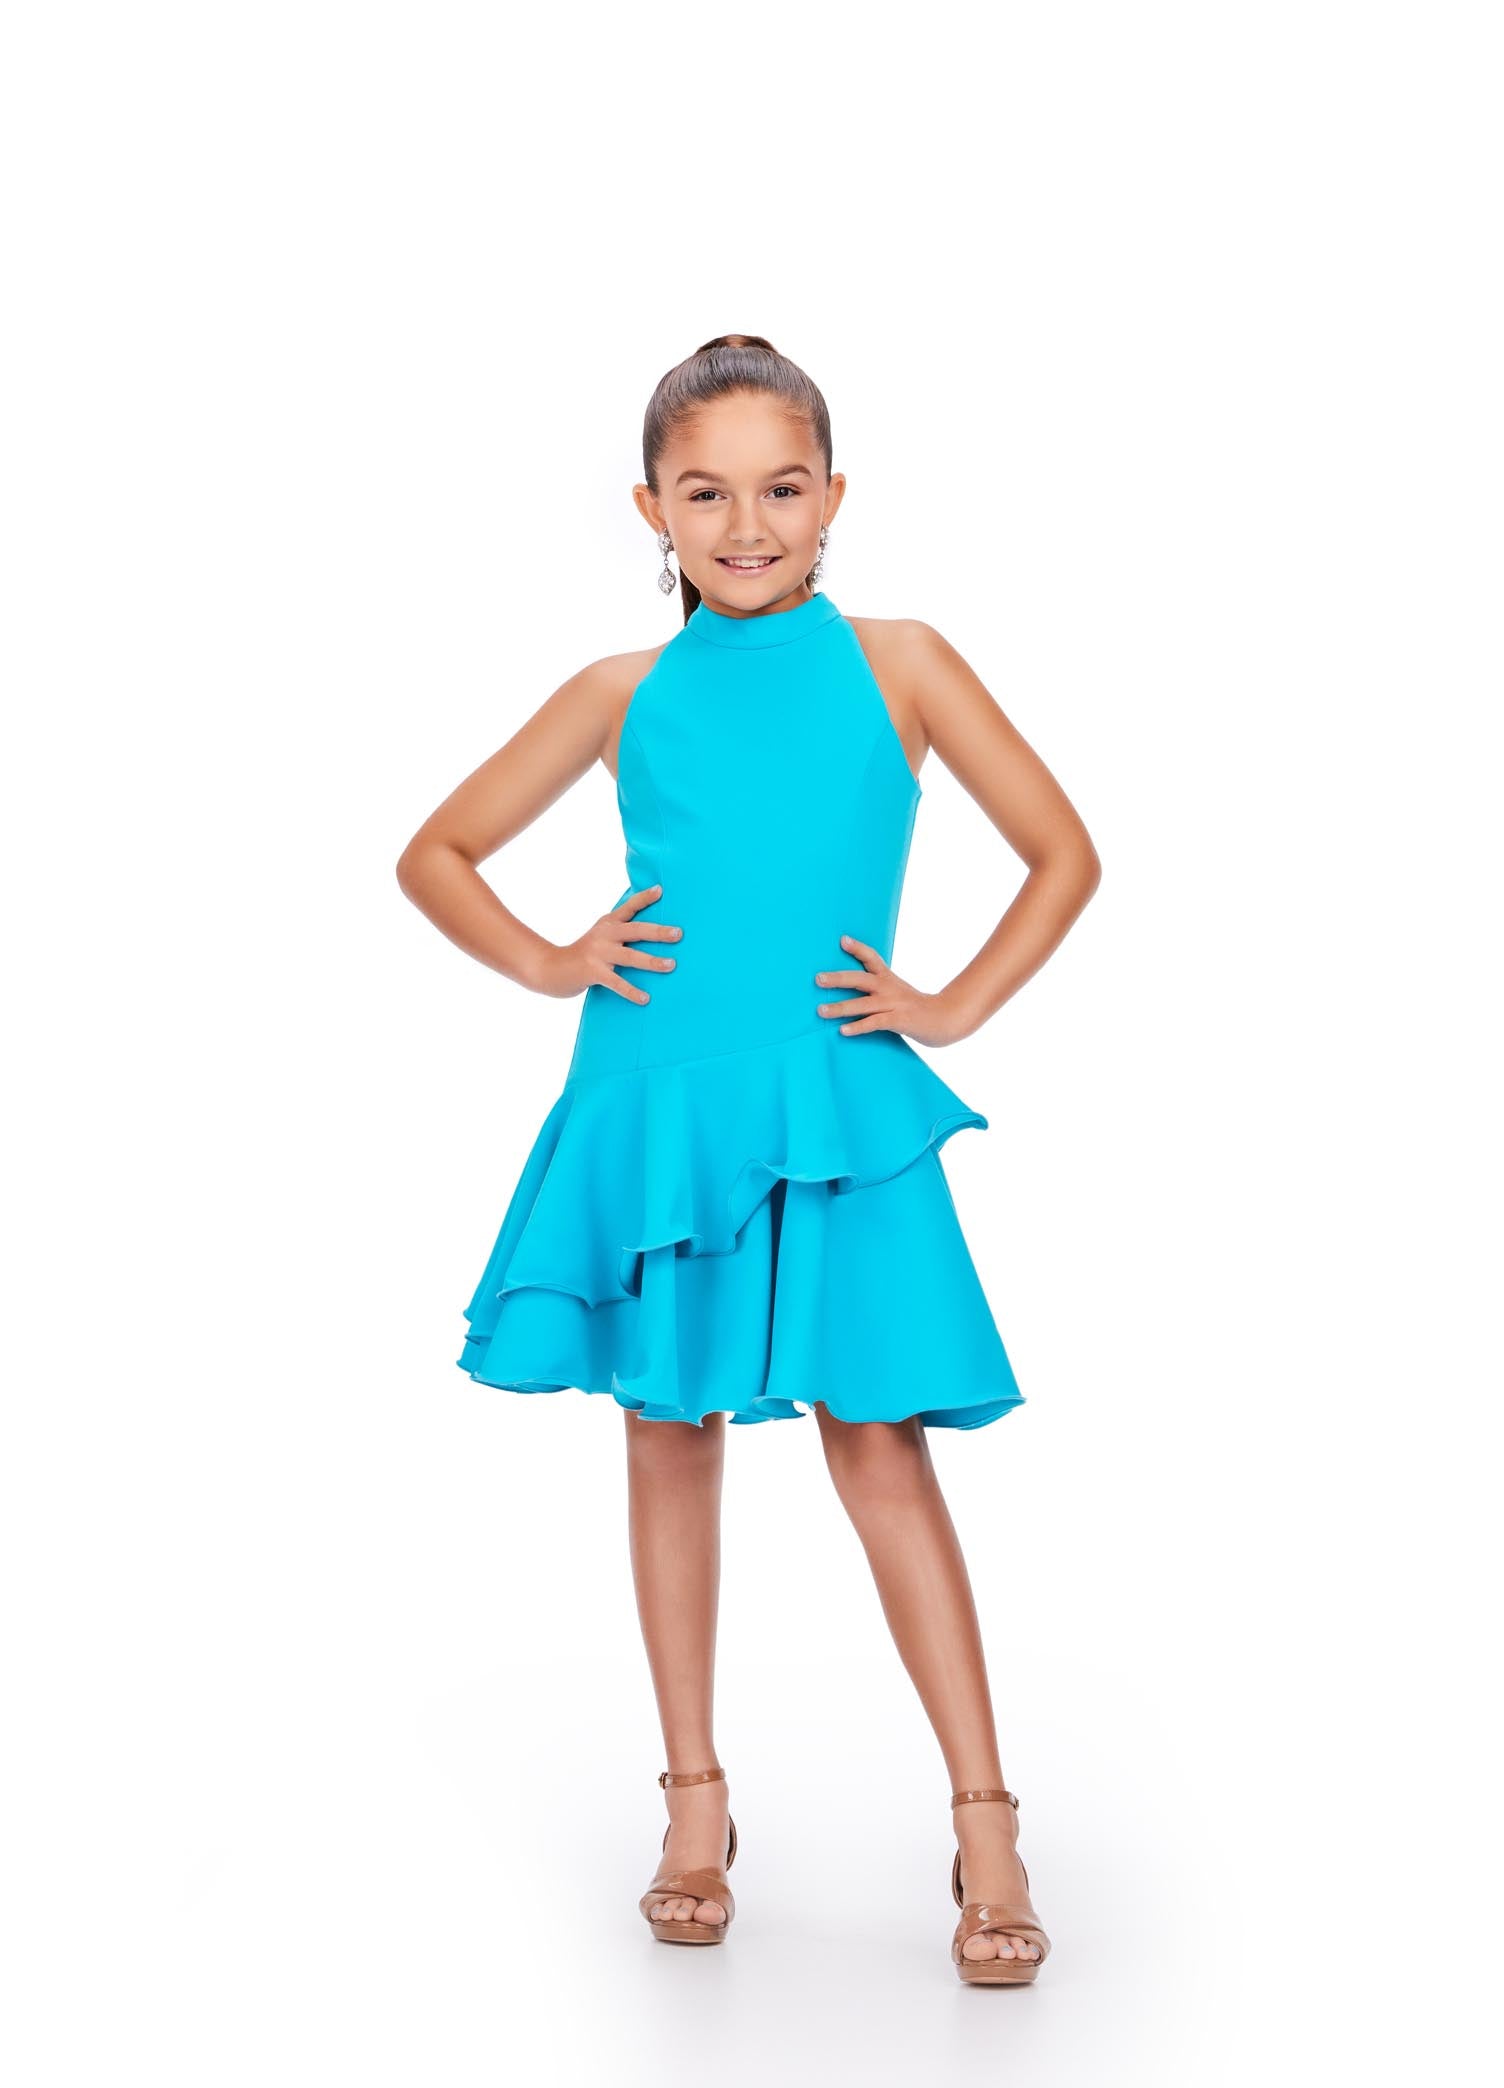 Ashley Lauren Kids 8204 Girls Turquoise Cocktail Dress with Asymmetrical Tiered Skirt and high neckline